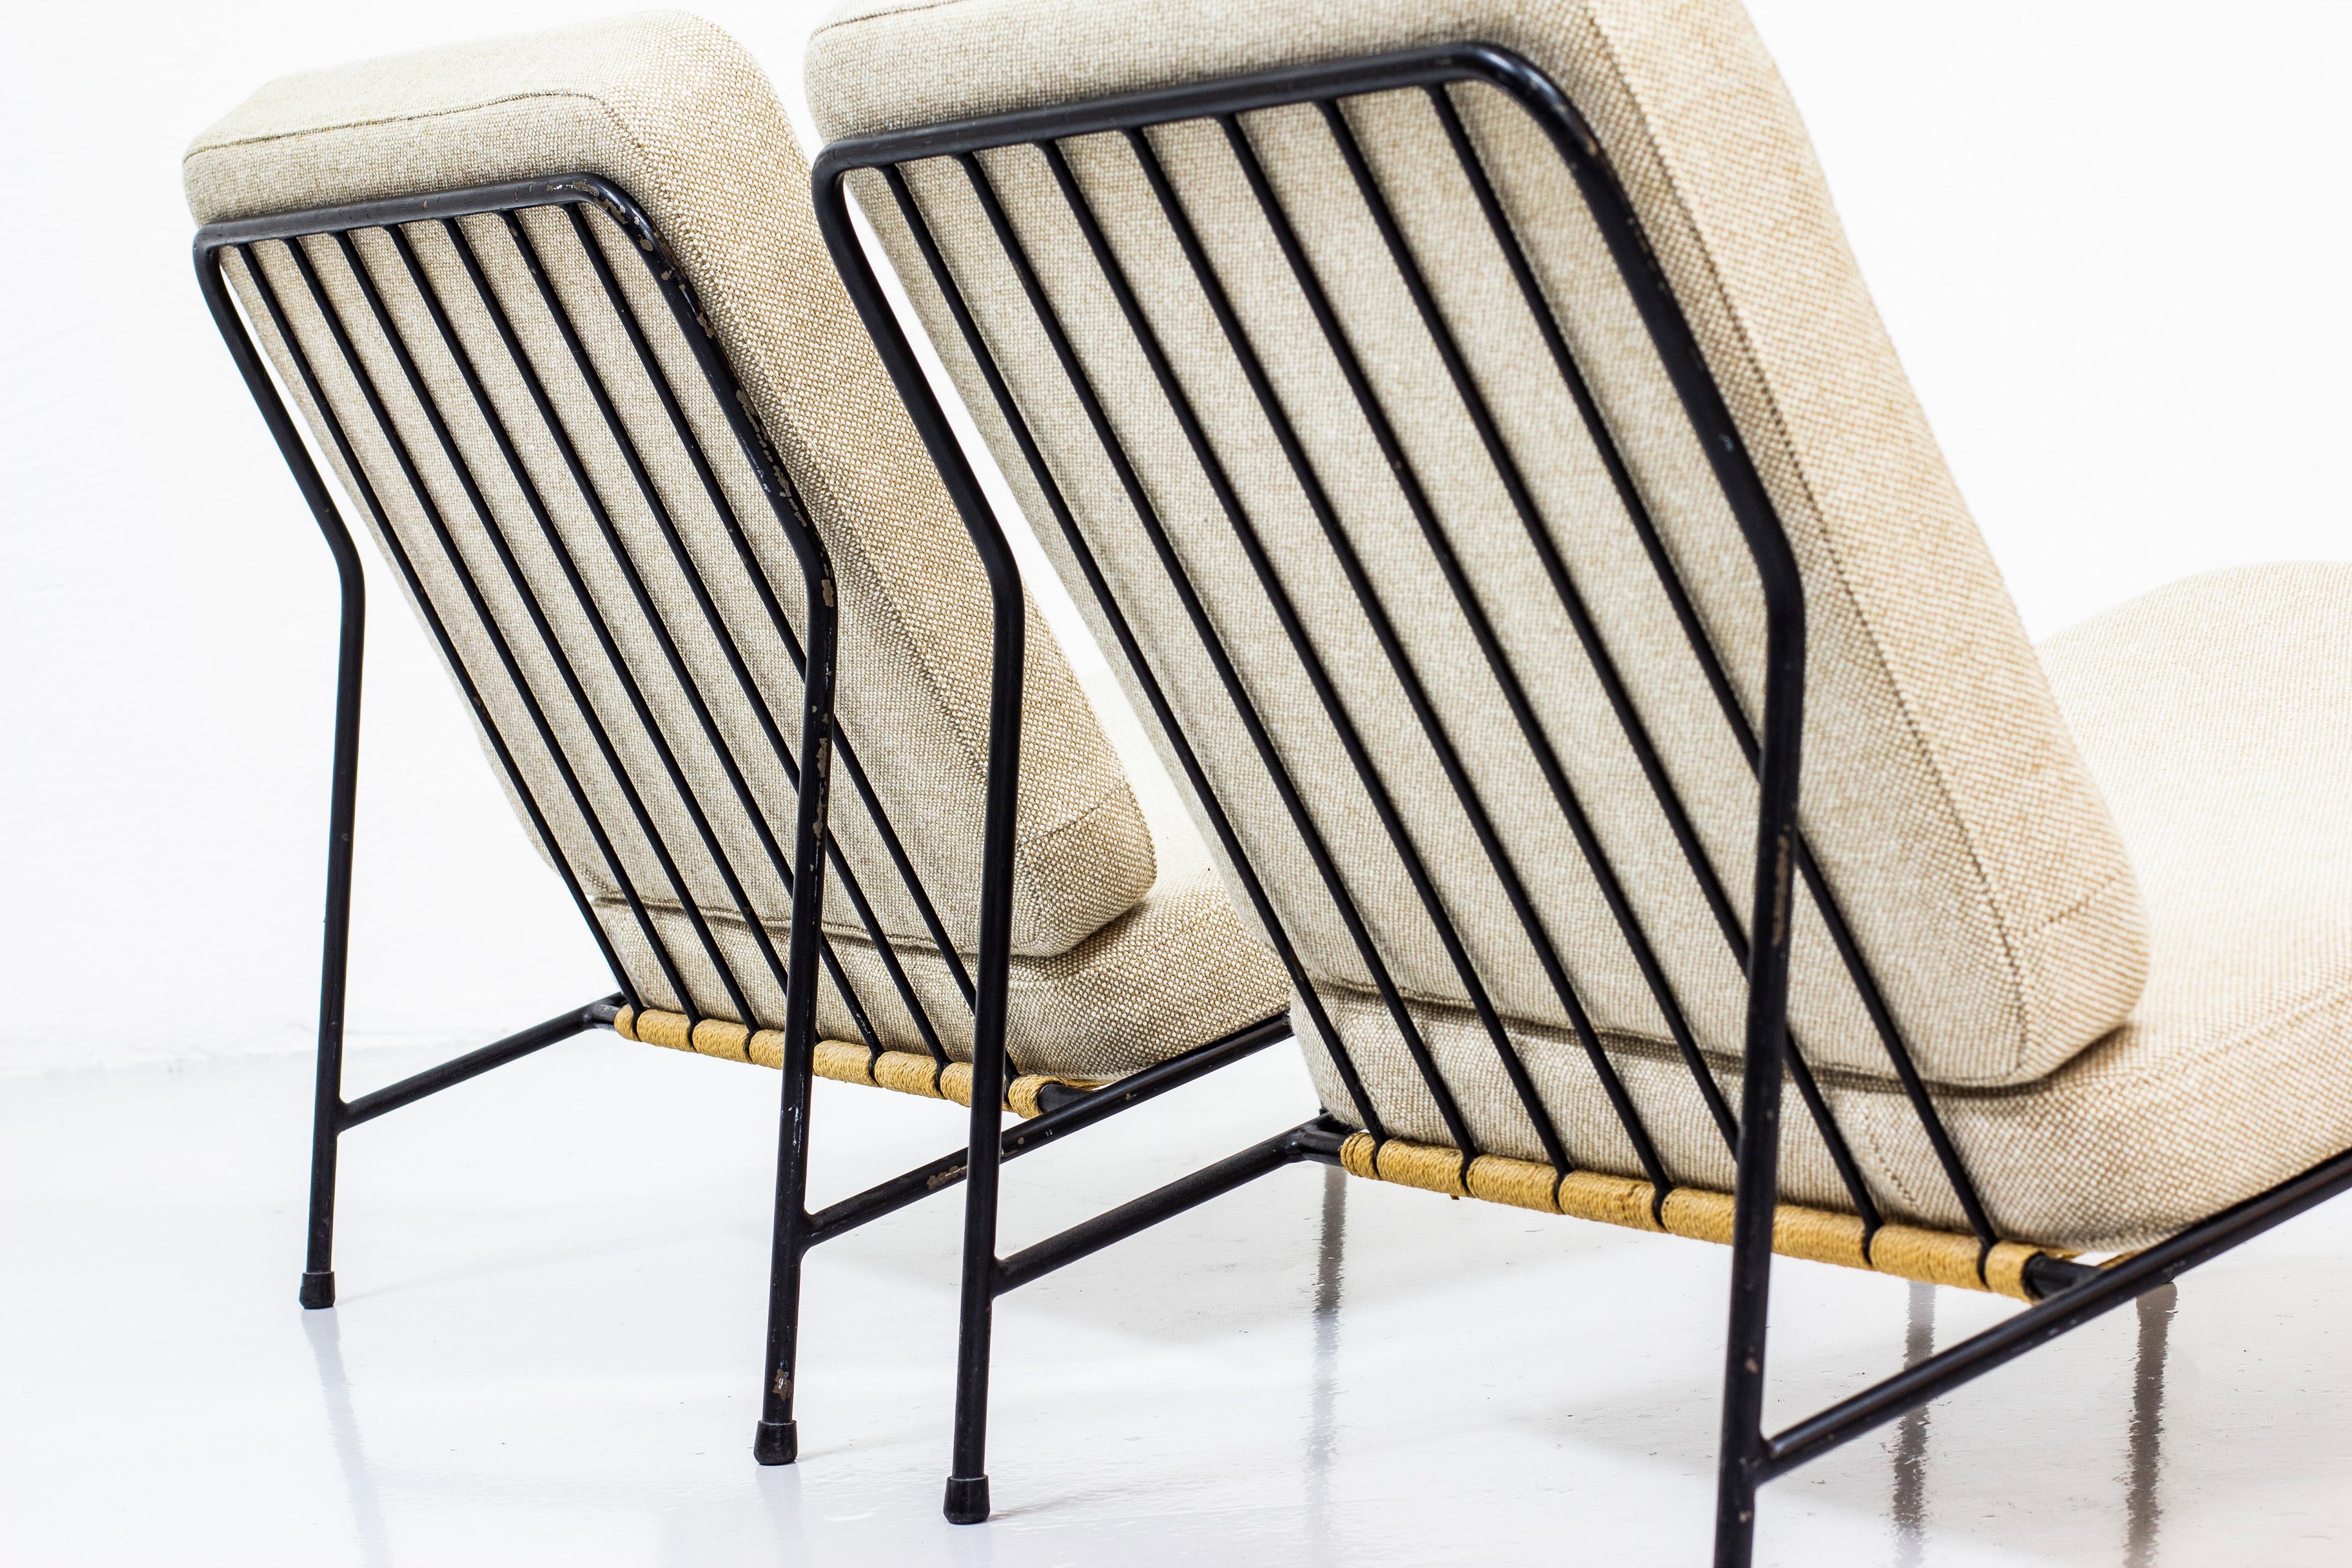 Lounge Chairs by Alf Svensson for Ljungs Industrier, Sweden, Midcentury, 1950s In Good Condition For Sale In Hägersten, SE